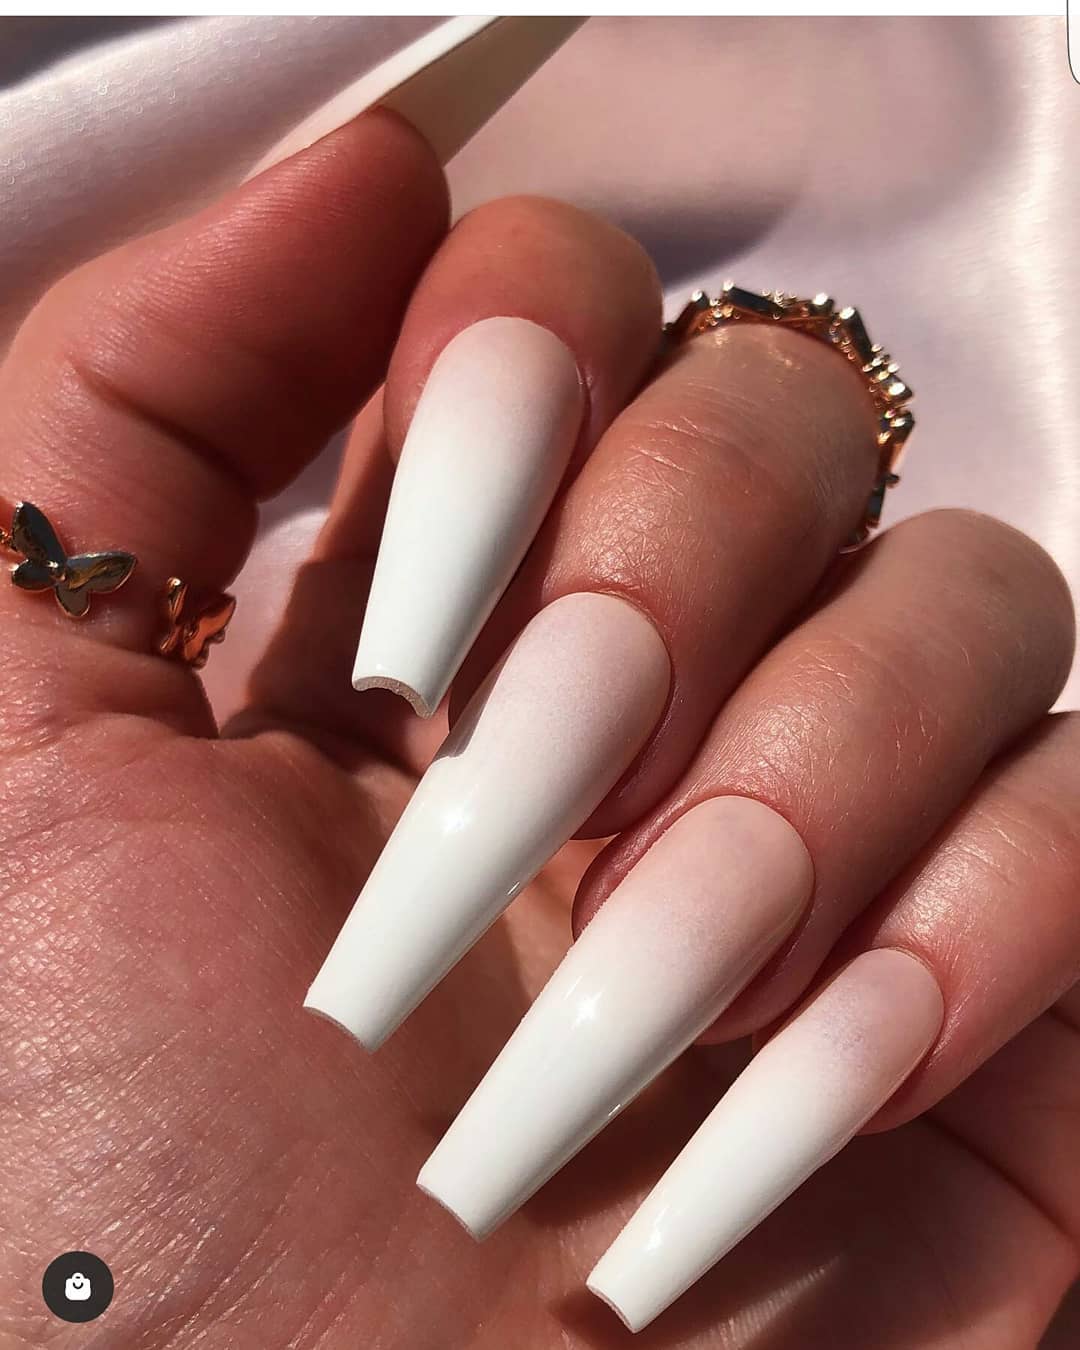 How bold do you dare to go? This long white acrylic manicure will look amazing for the prom season, as well as for women who like to look fierce with their chosen design.